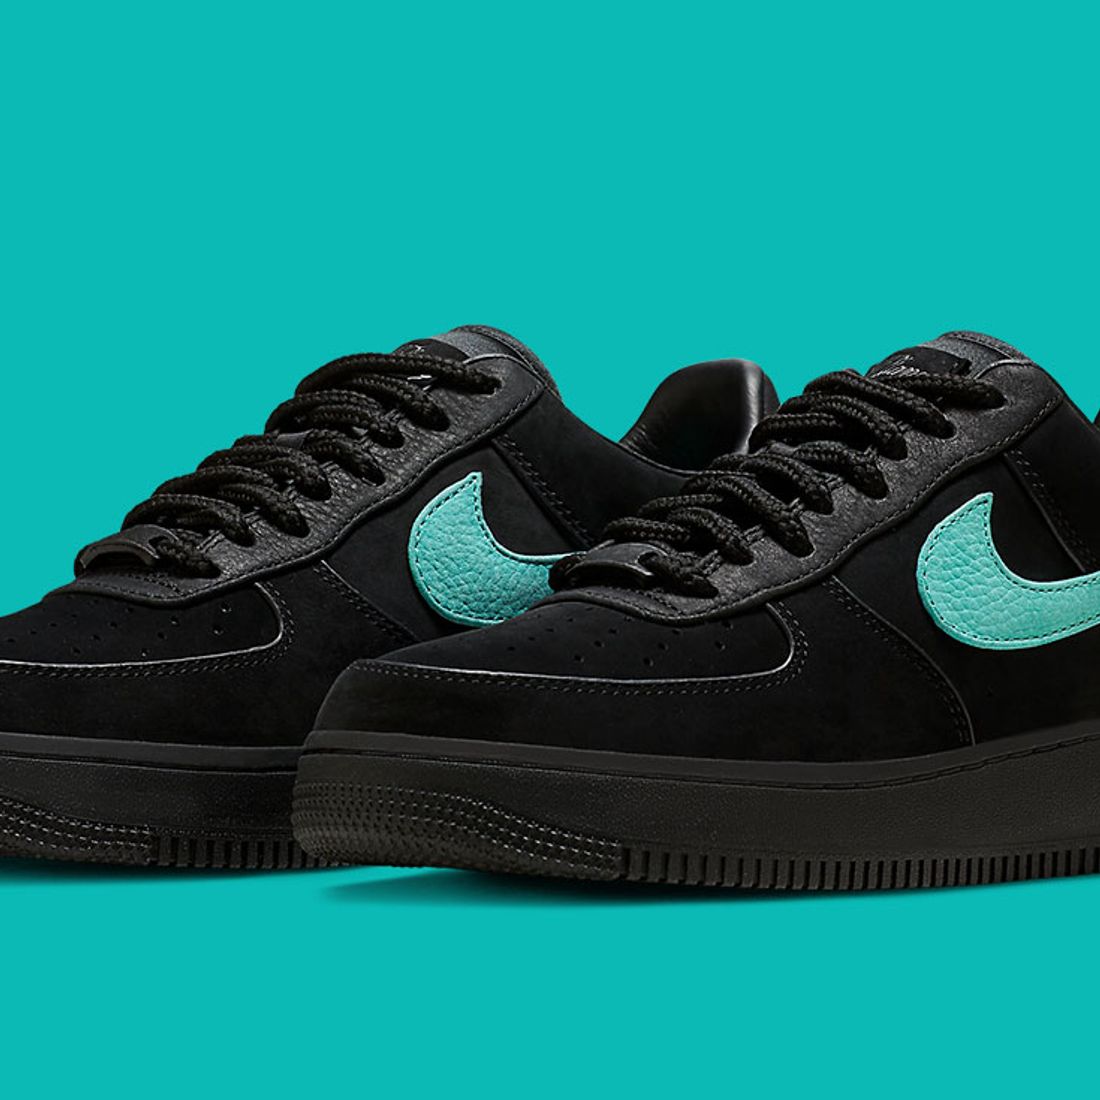 Where to Buy the Tiffany & Co. x Nike Air Force 1 '1837' - Sneaker